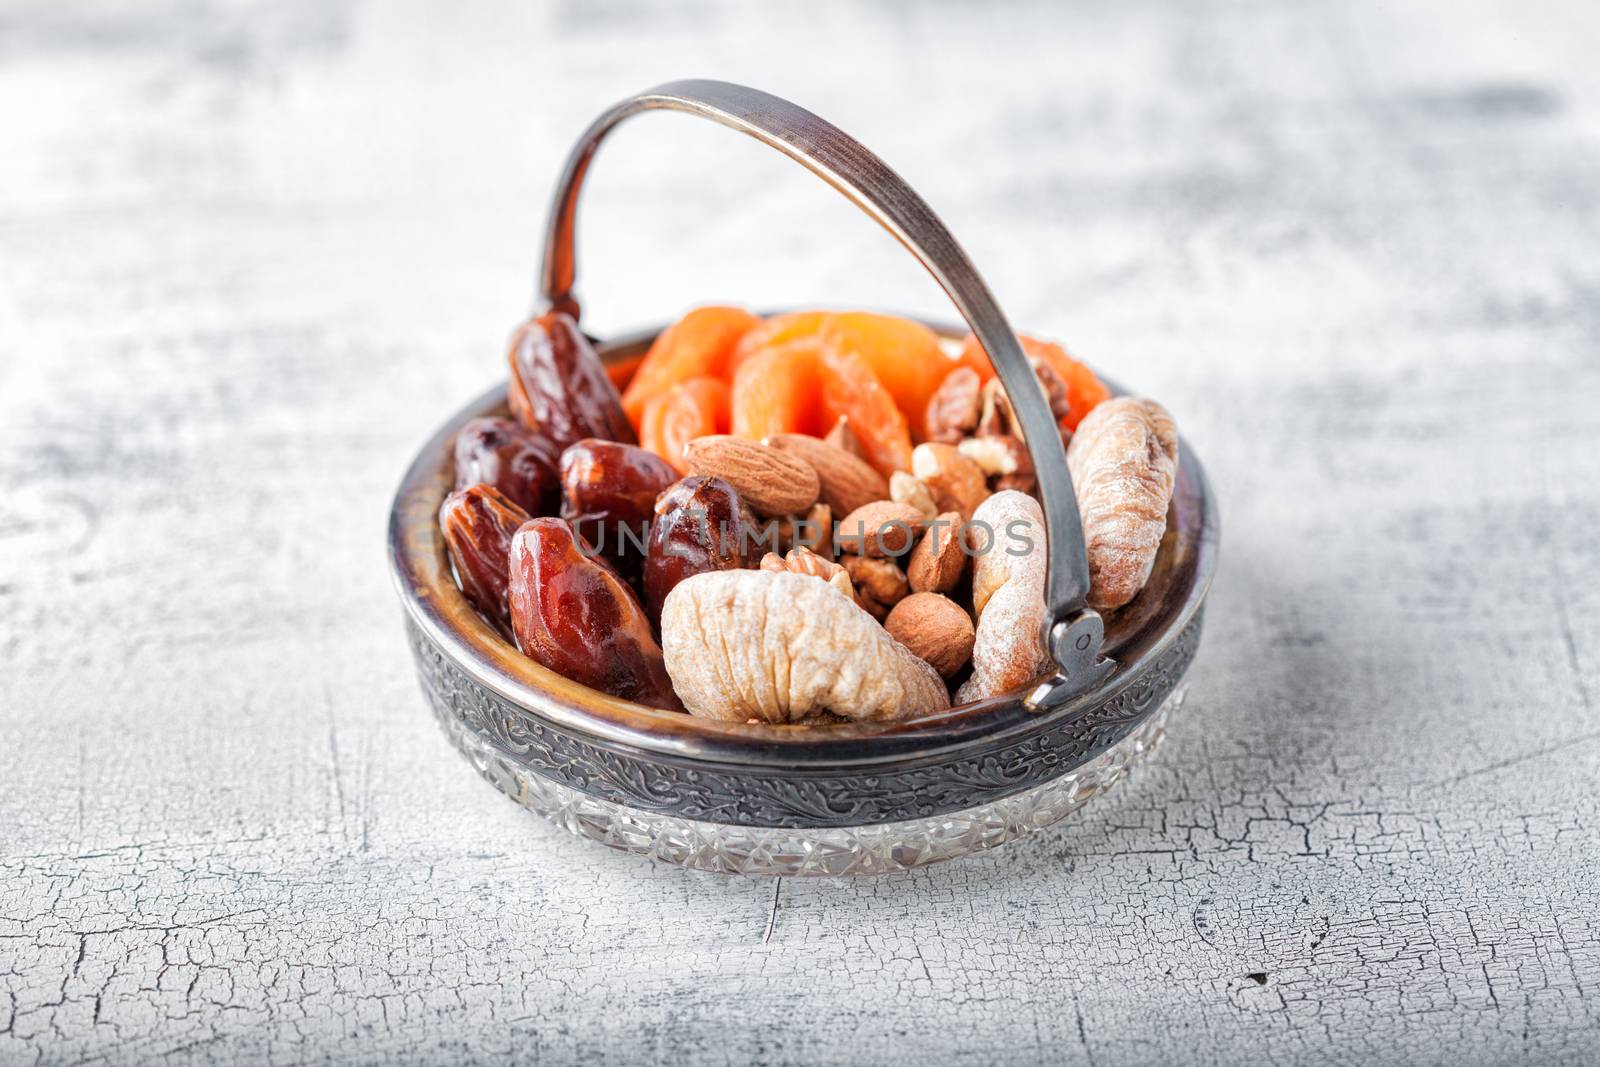 Mixture of dried fruits and nuts by supercat67